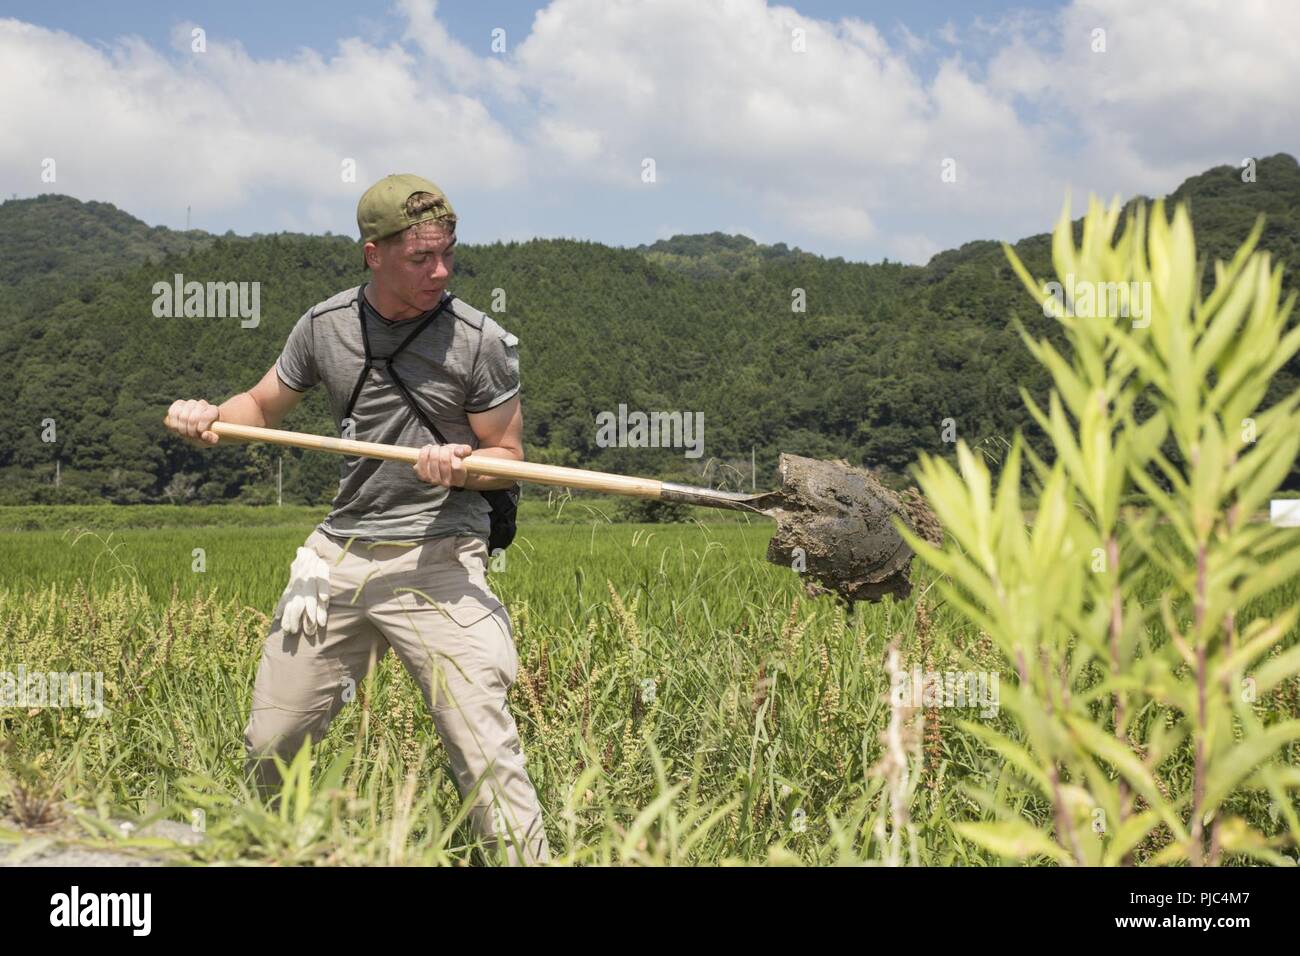 U.S. Marine Corps Lance Cpl. Samuel Bilbey, an ordnance technician with Marine Fighter Attack Squadron 121, shovels mud and debris during a volunteer event at Shimo-nakazone, Shuto in Iwkauni City, Japan, July 14, 2018. The volunteer event, organized by the Marine Corps Community Services Single Marine Program, provided service members with the opportunity to help local Japanese residents clean up and recover after the area was flooded by excessive rainfall. Stock Photo